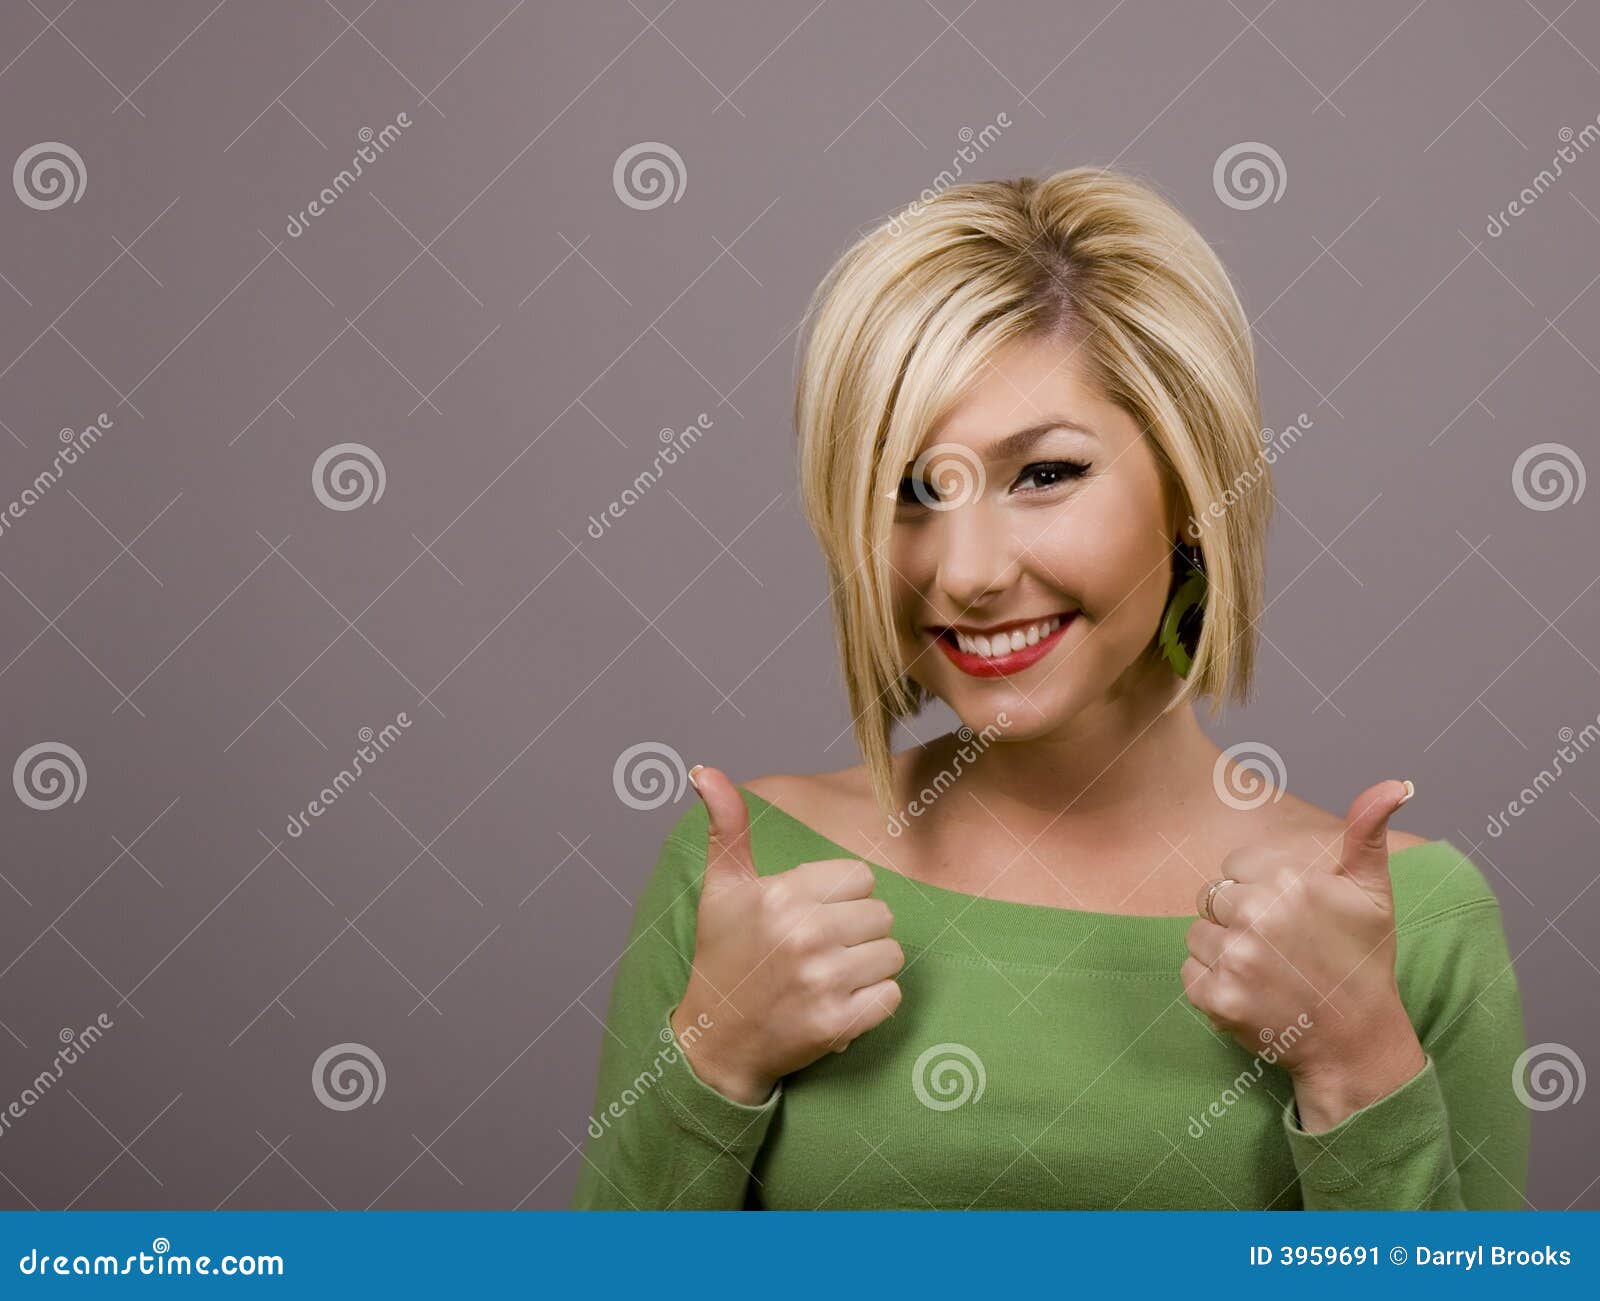 Blonde Thumbs Up Stock Image Image Of Emotion Lovely 39596